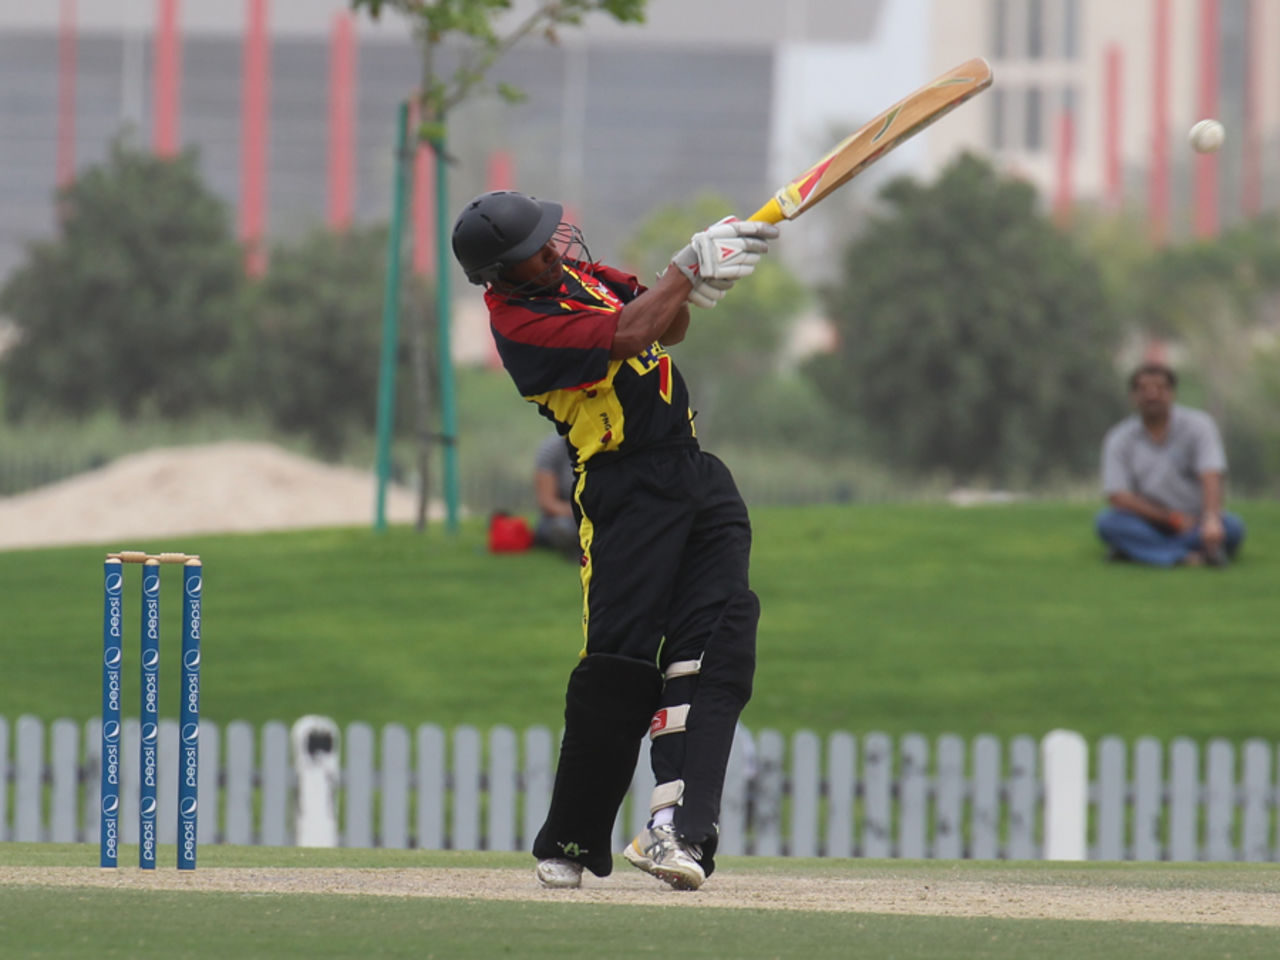 Vani Morea pulls a ball for six during his unbeaten 74 against Hong Kong in the 3rd/4th Play-off match at the ICC WCL2 in Dubai